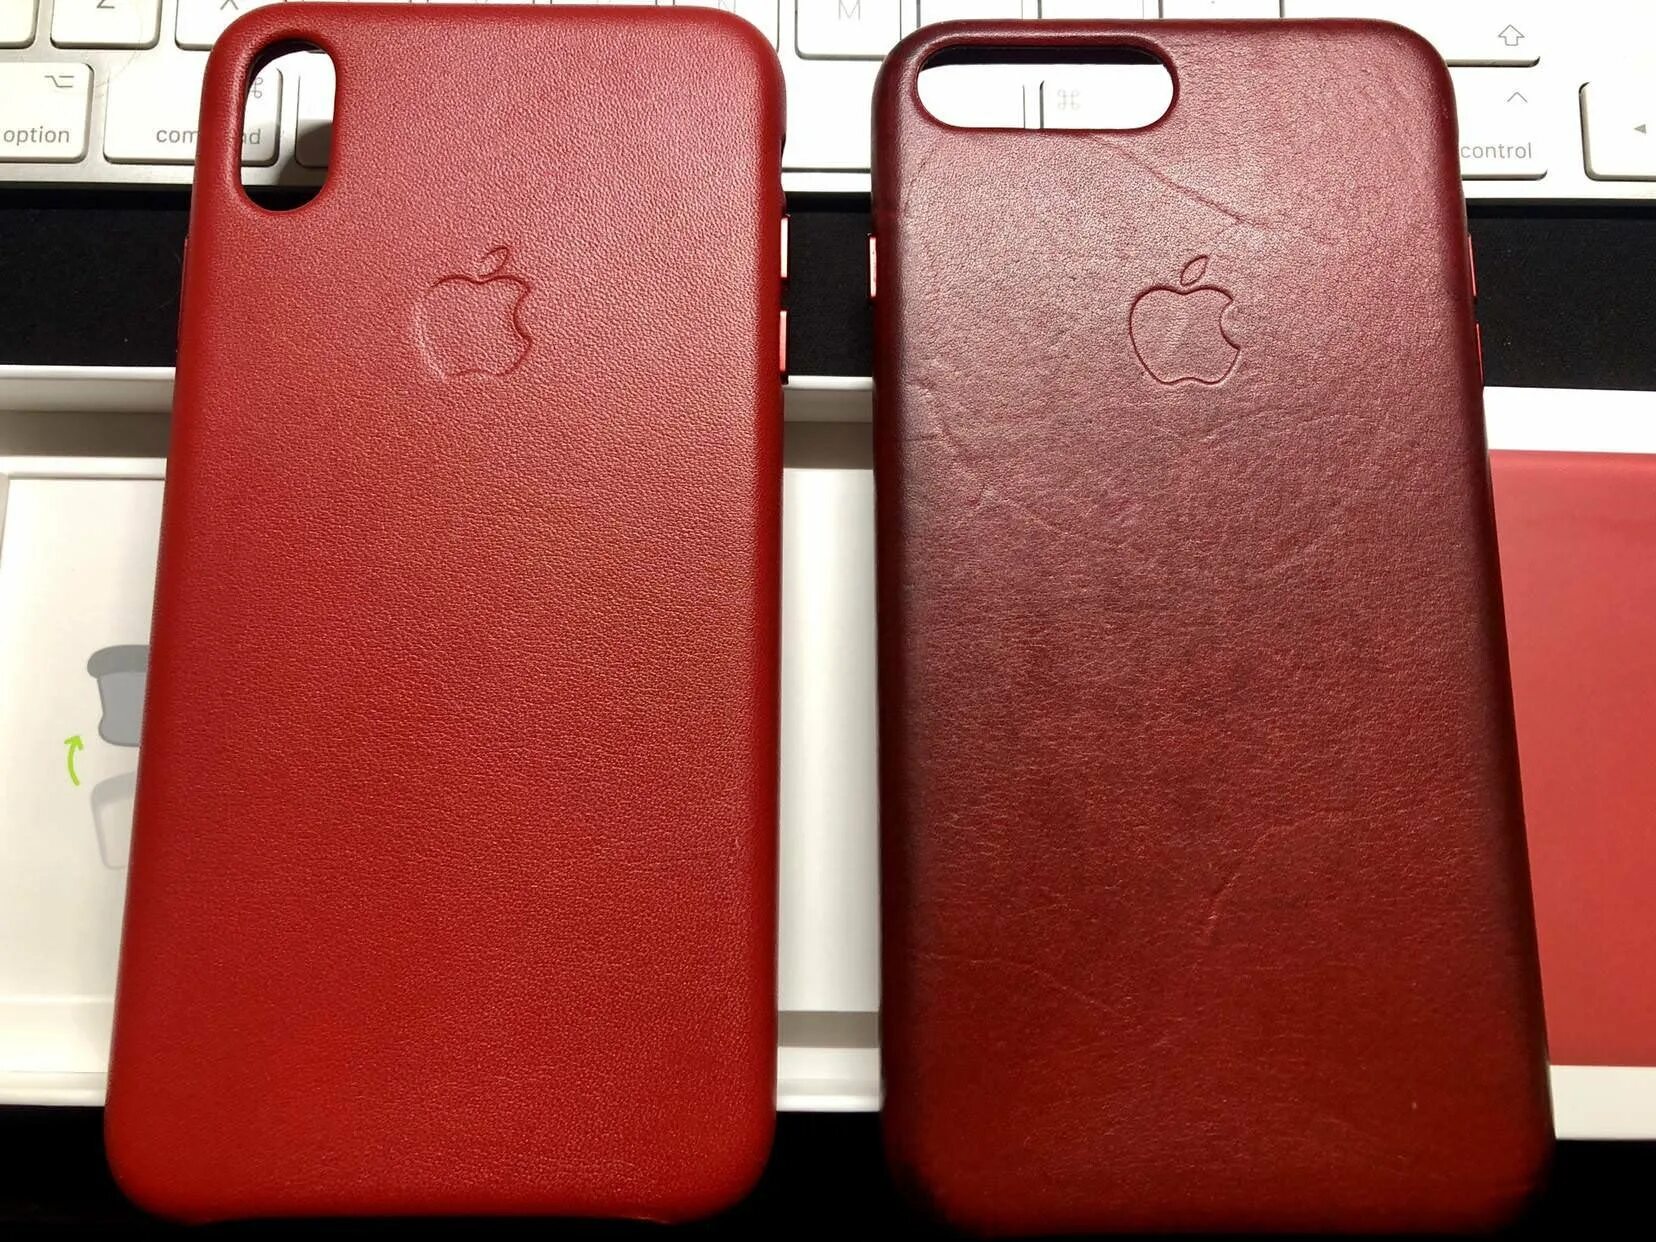 Apple Leather Case iphone 12 Red. XS Max Leather Case Red. Чехол Leather Case 11 Pro Red. Apple iphone 11 Leather Case Red Patina. Чехлы апл